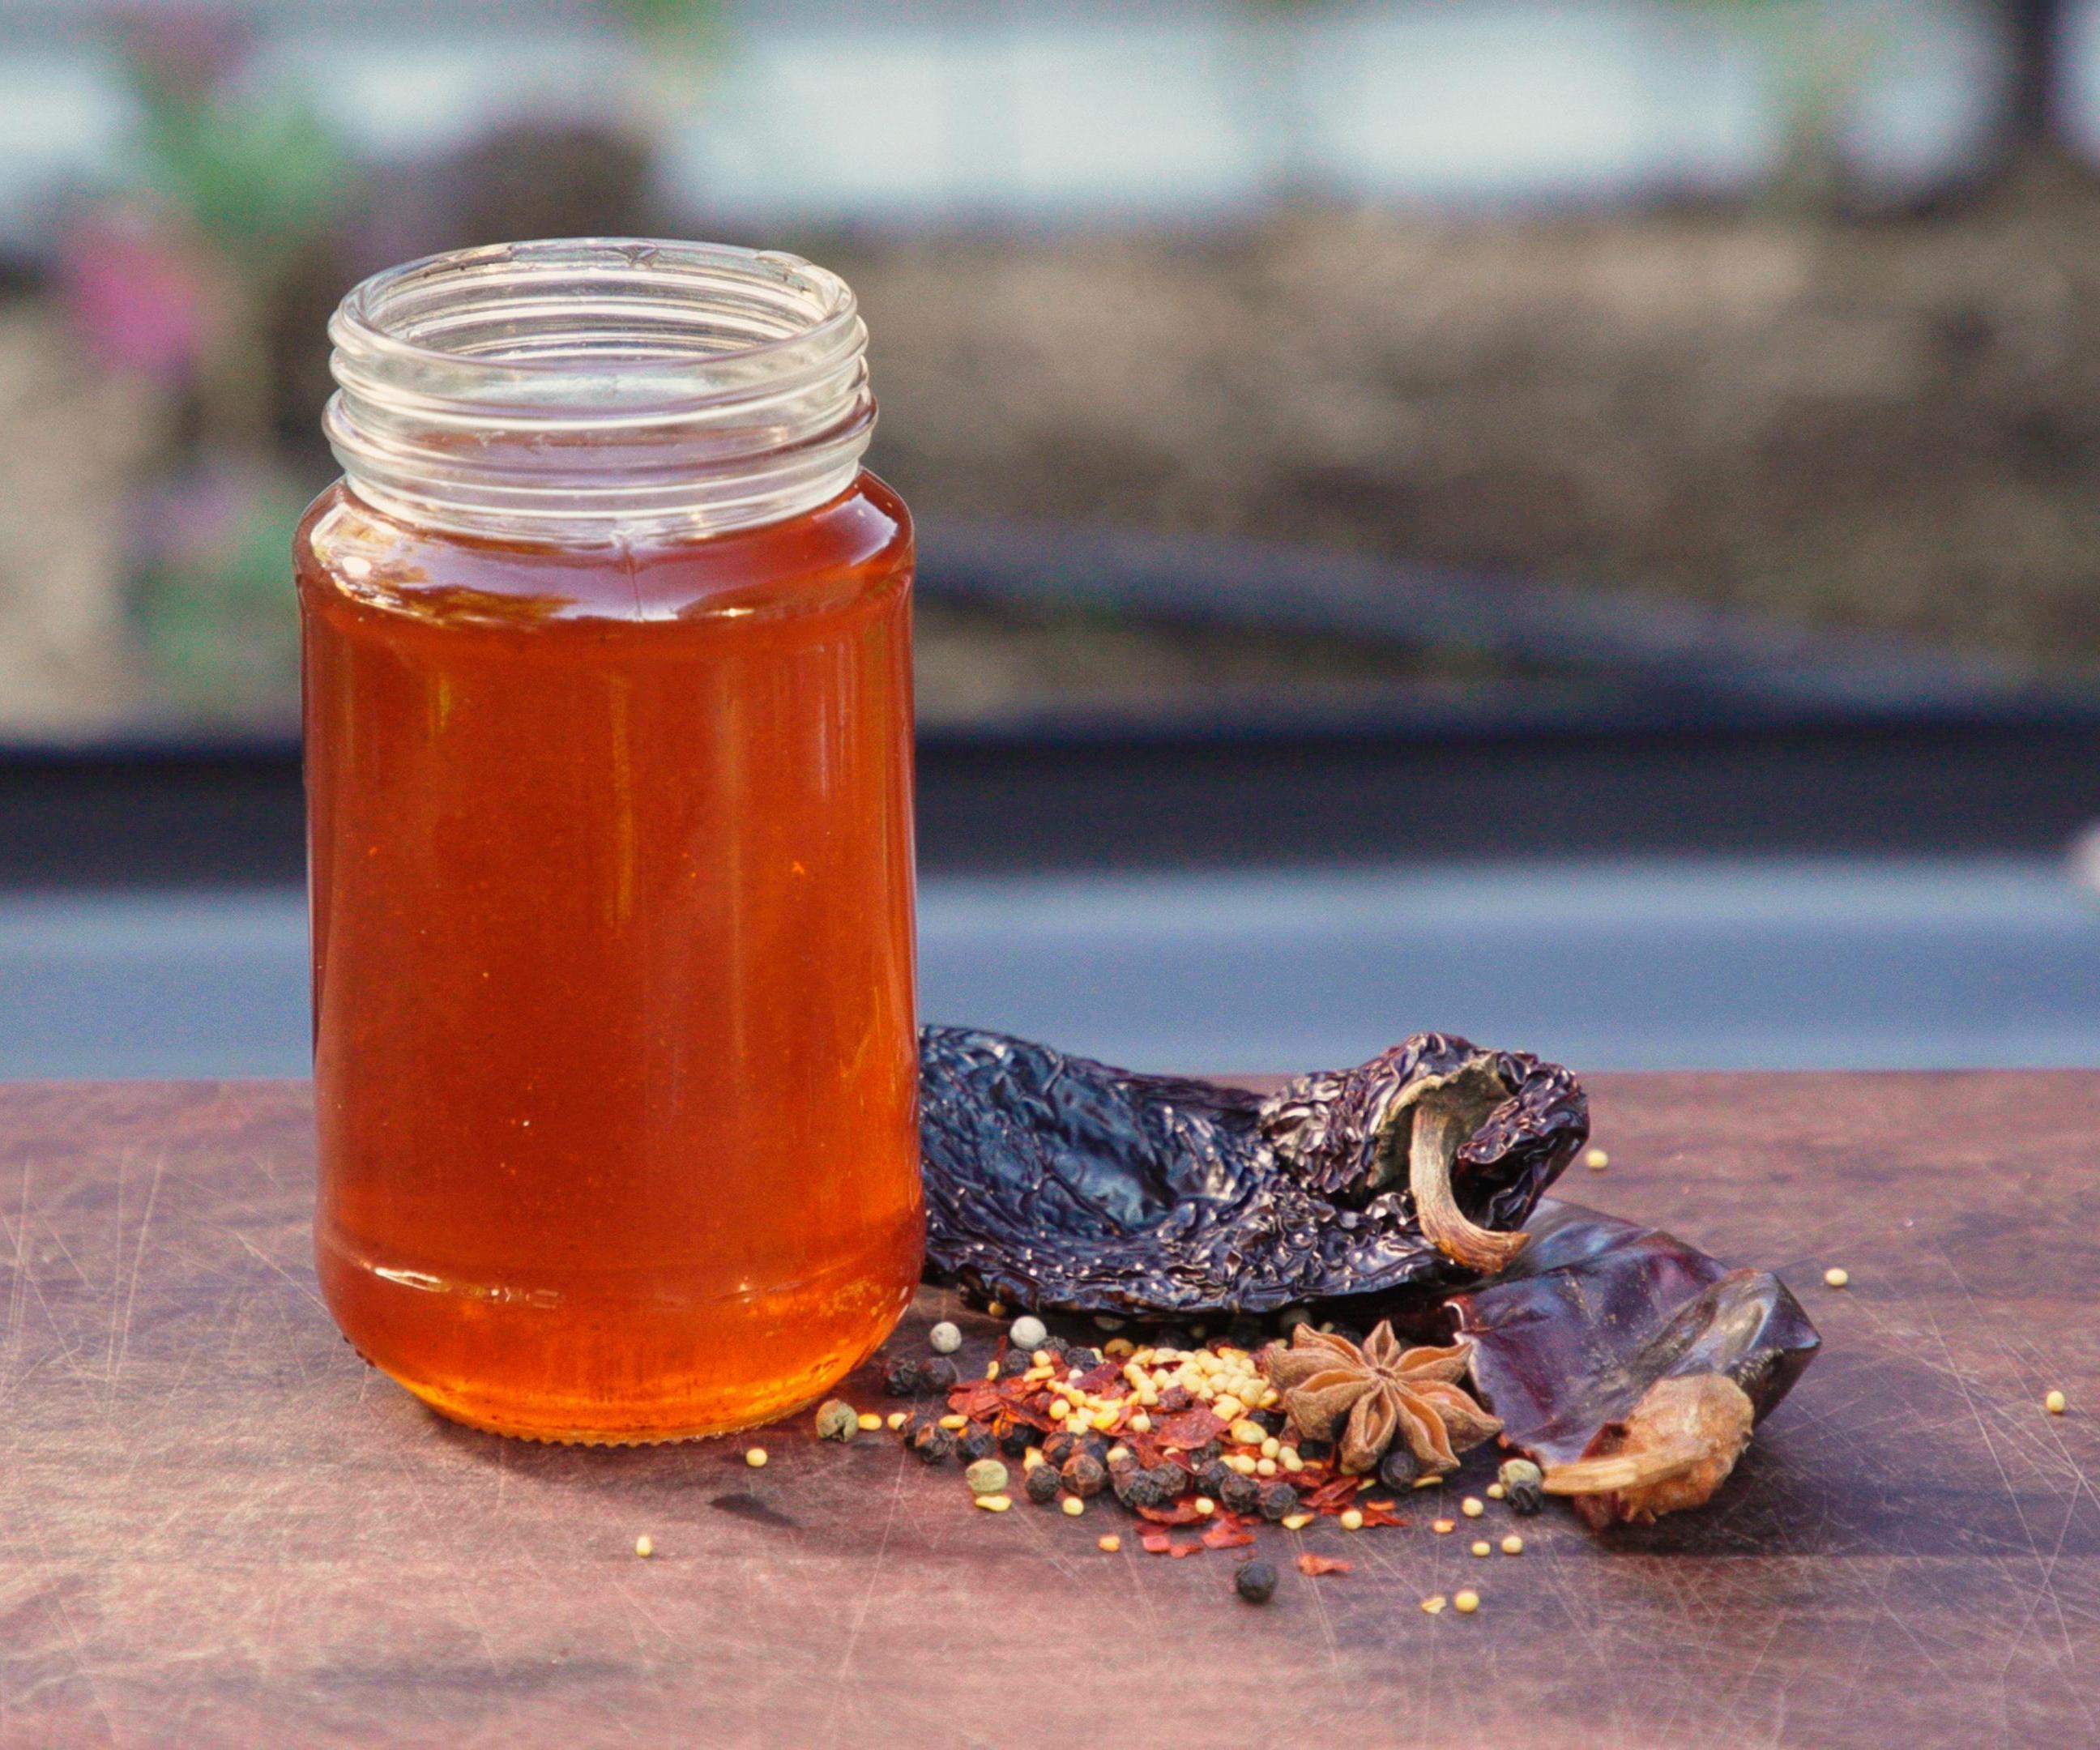 How to Make Infused Chilli Oil